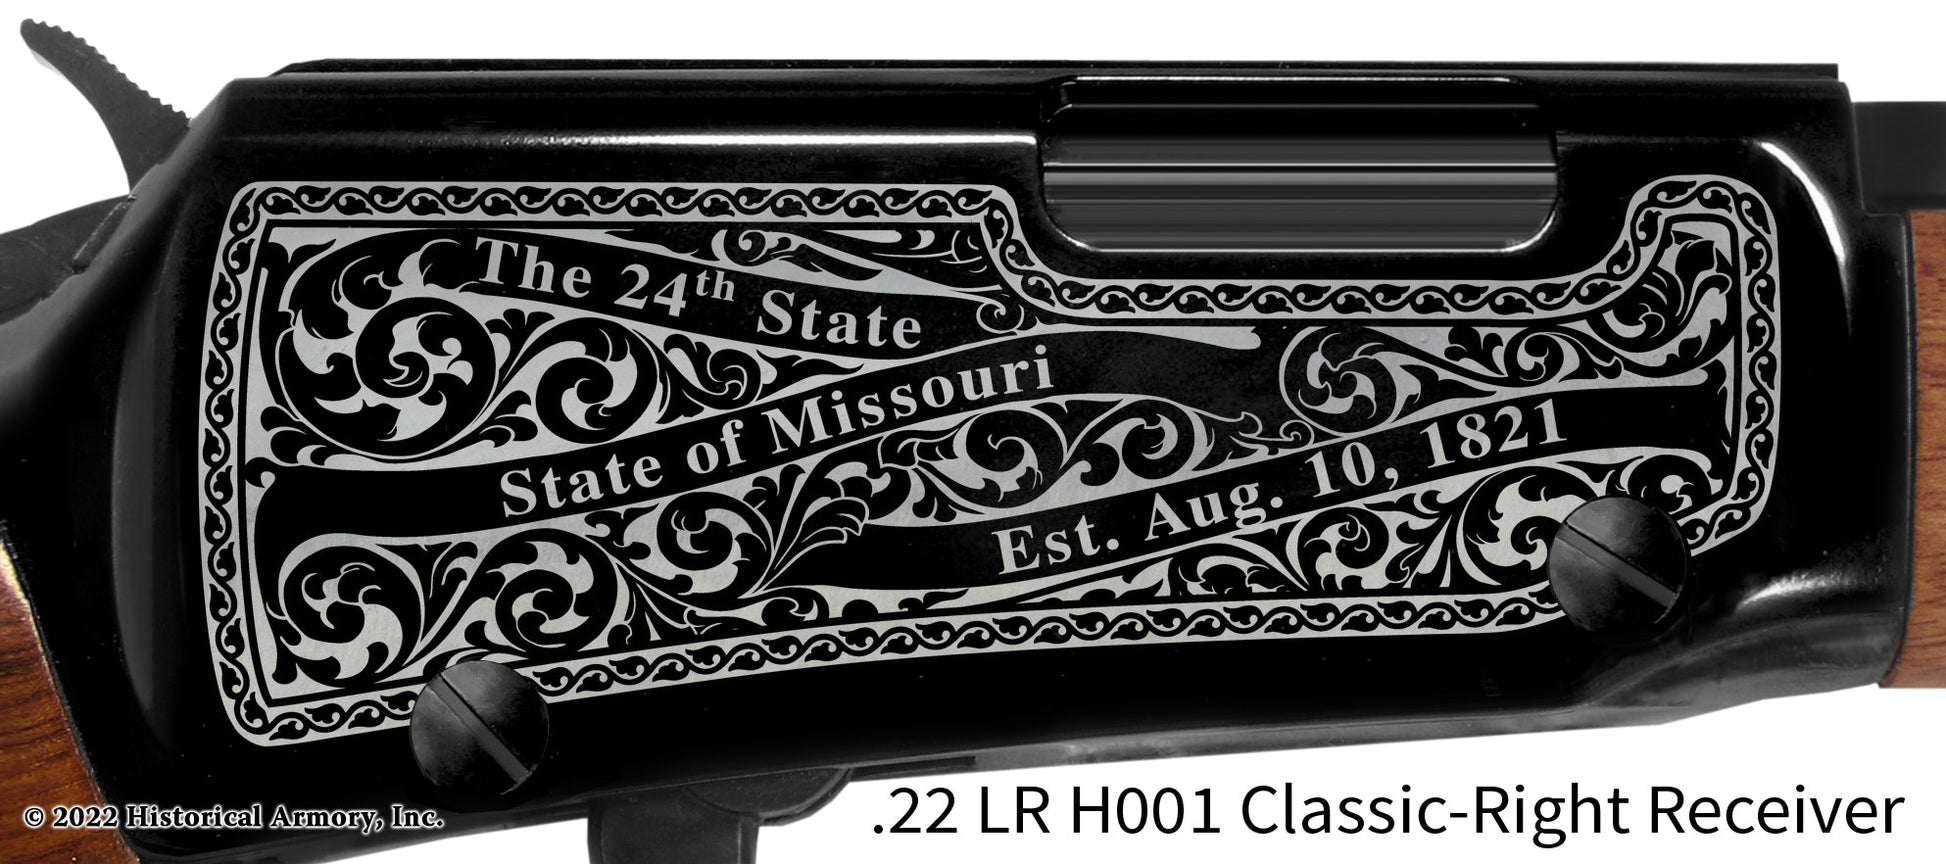 Clay County Missouri Engraved Henry H001 Rifle